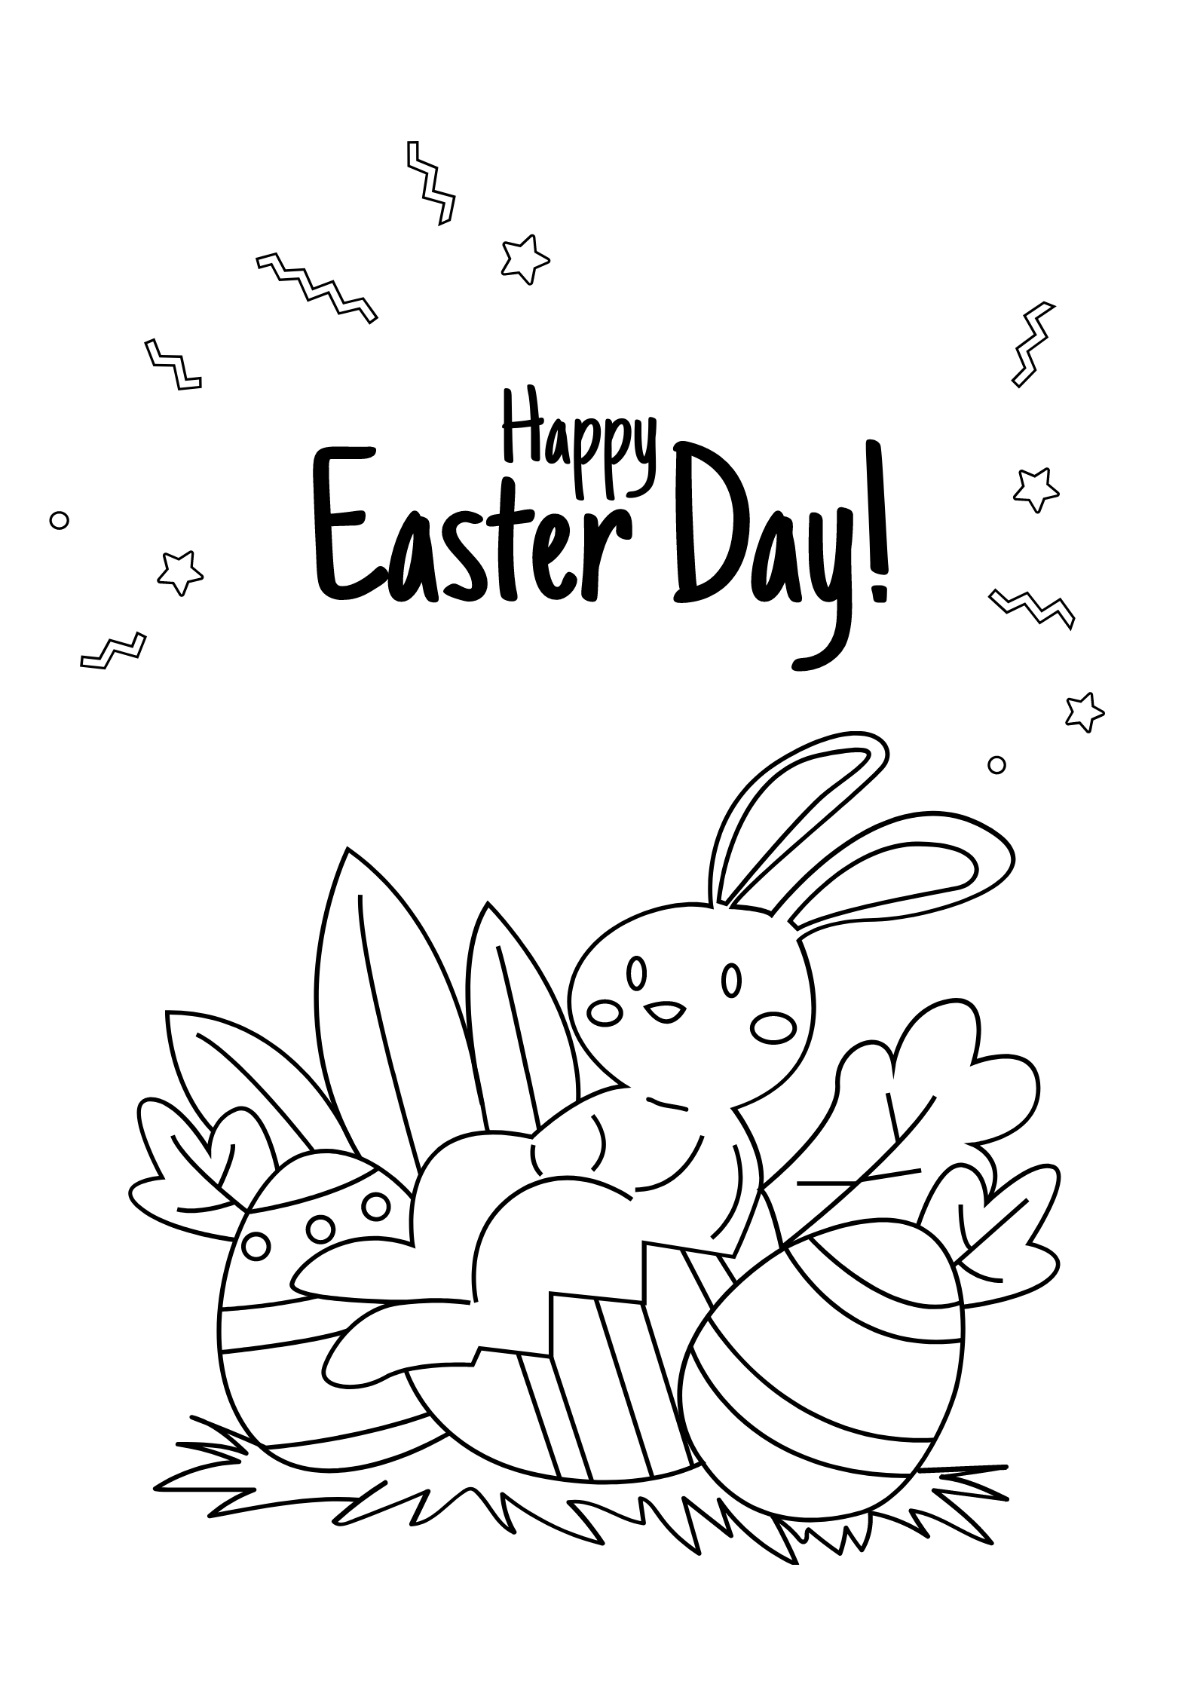 Happy Easter Drawing coloring page - Download, Print or Color Online for  Free